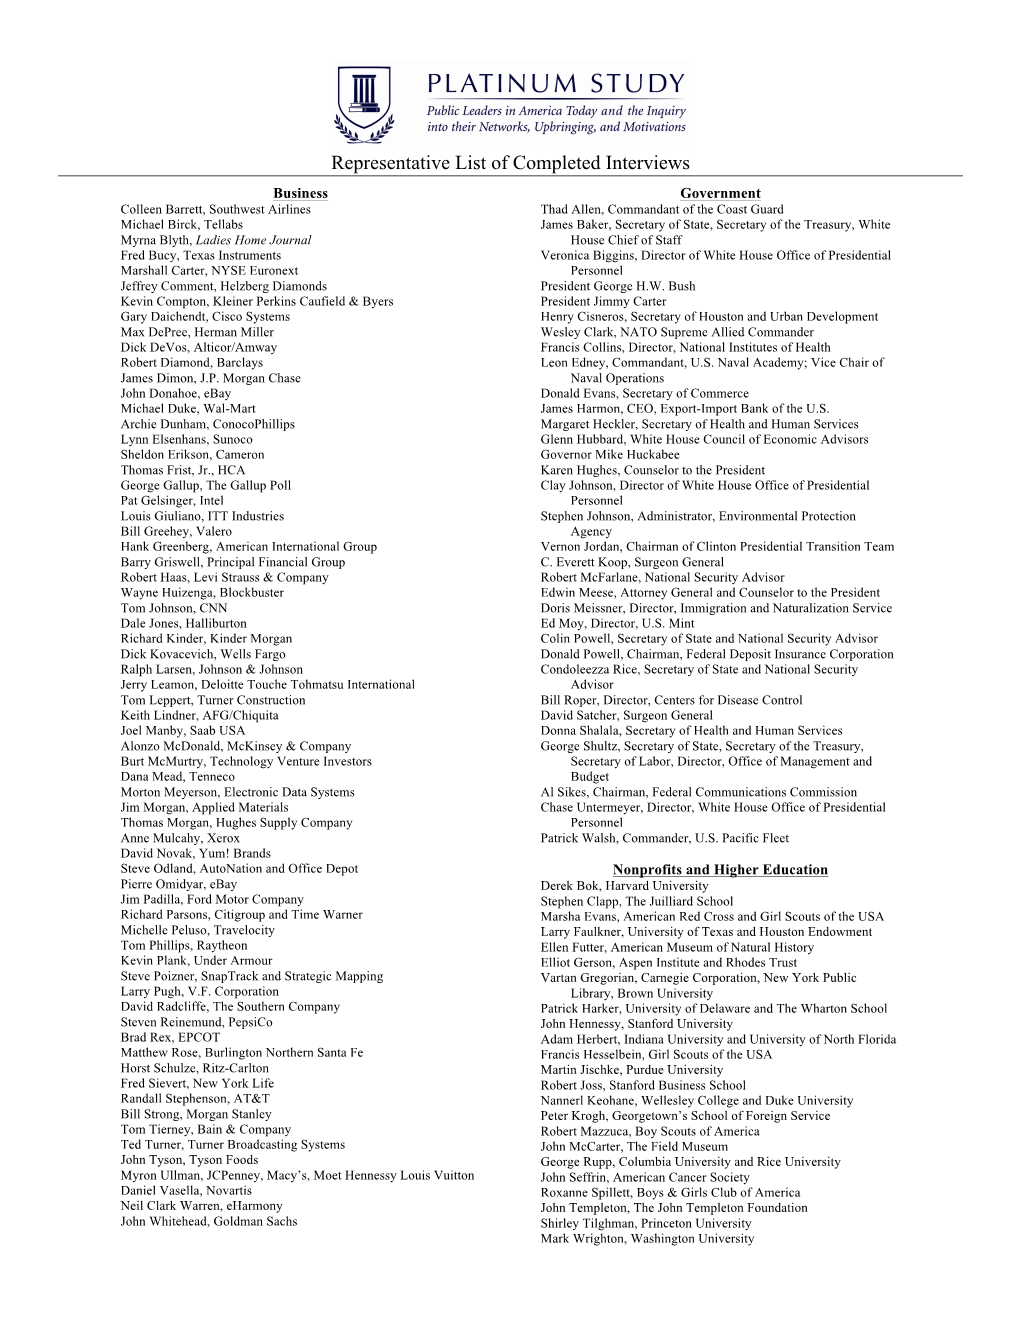 Representative List of Completed Interviews